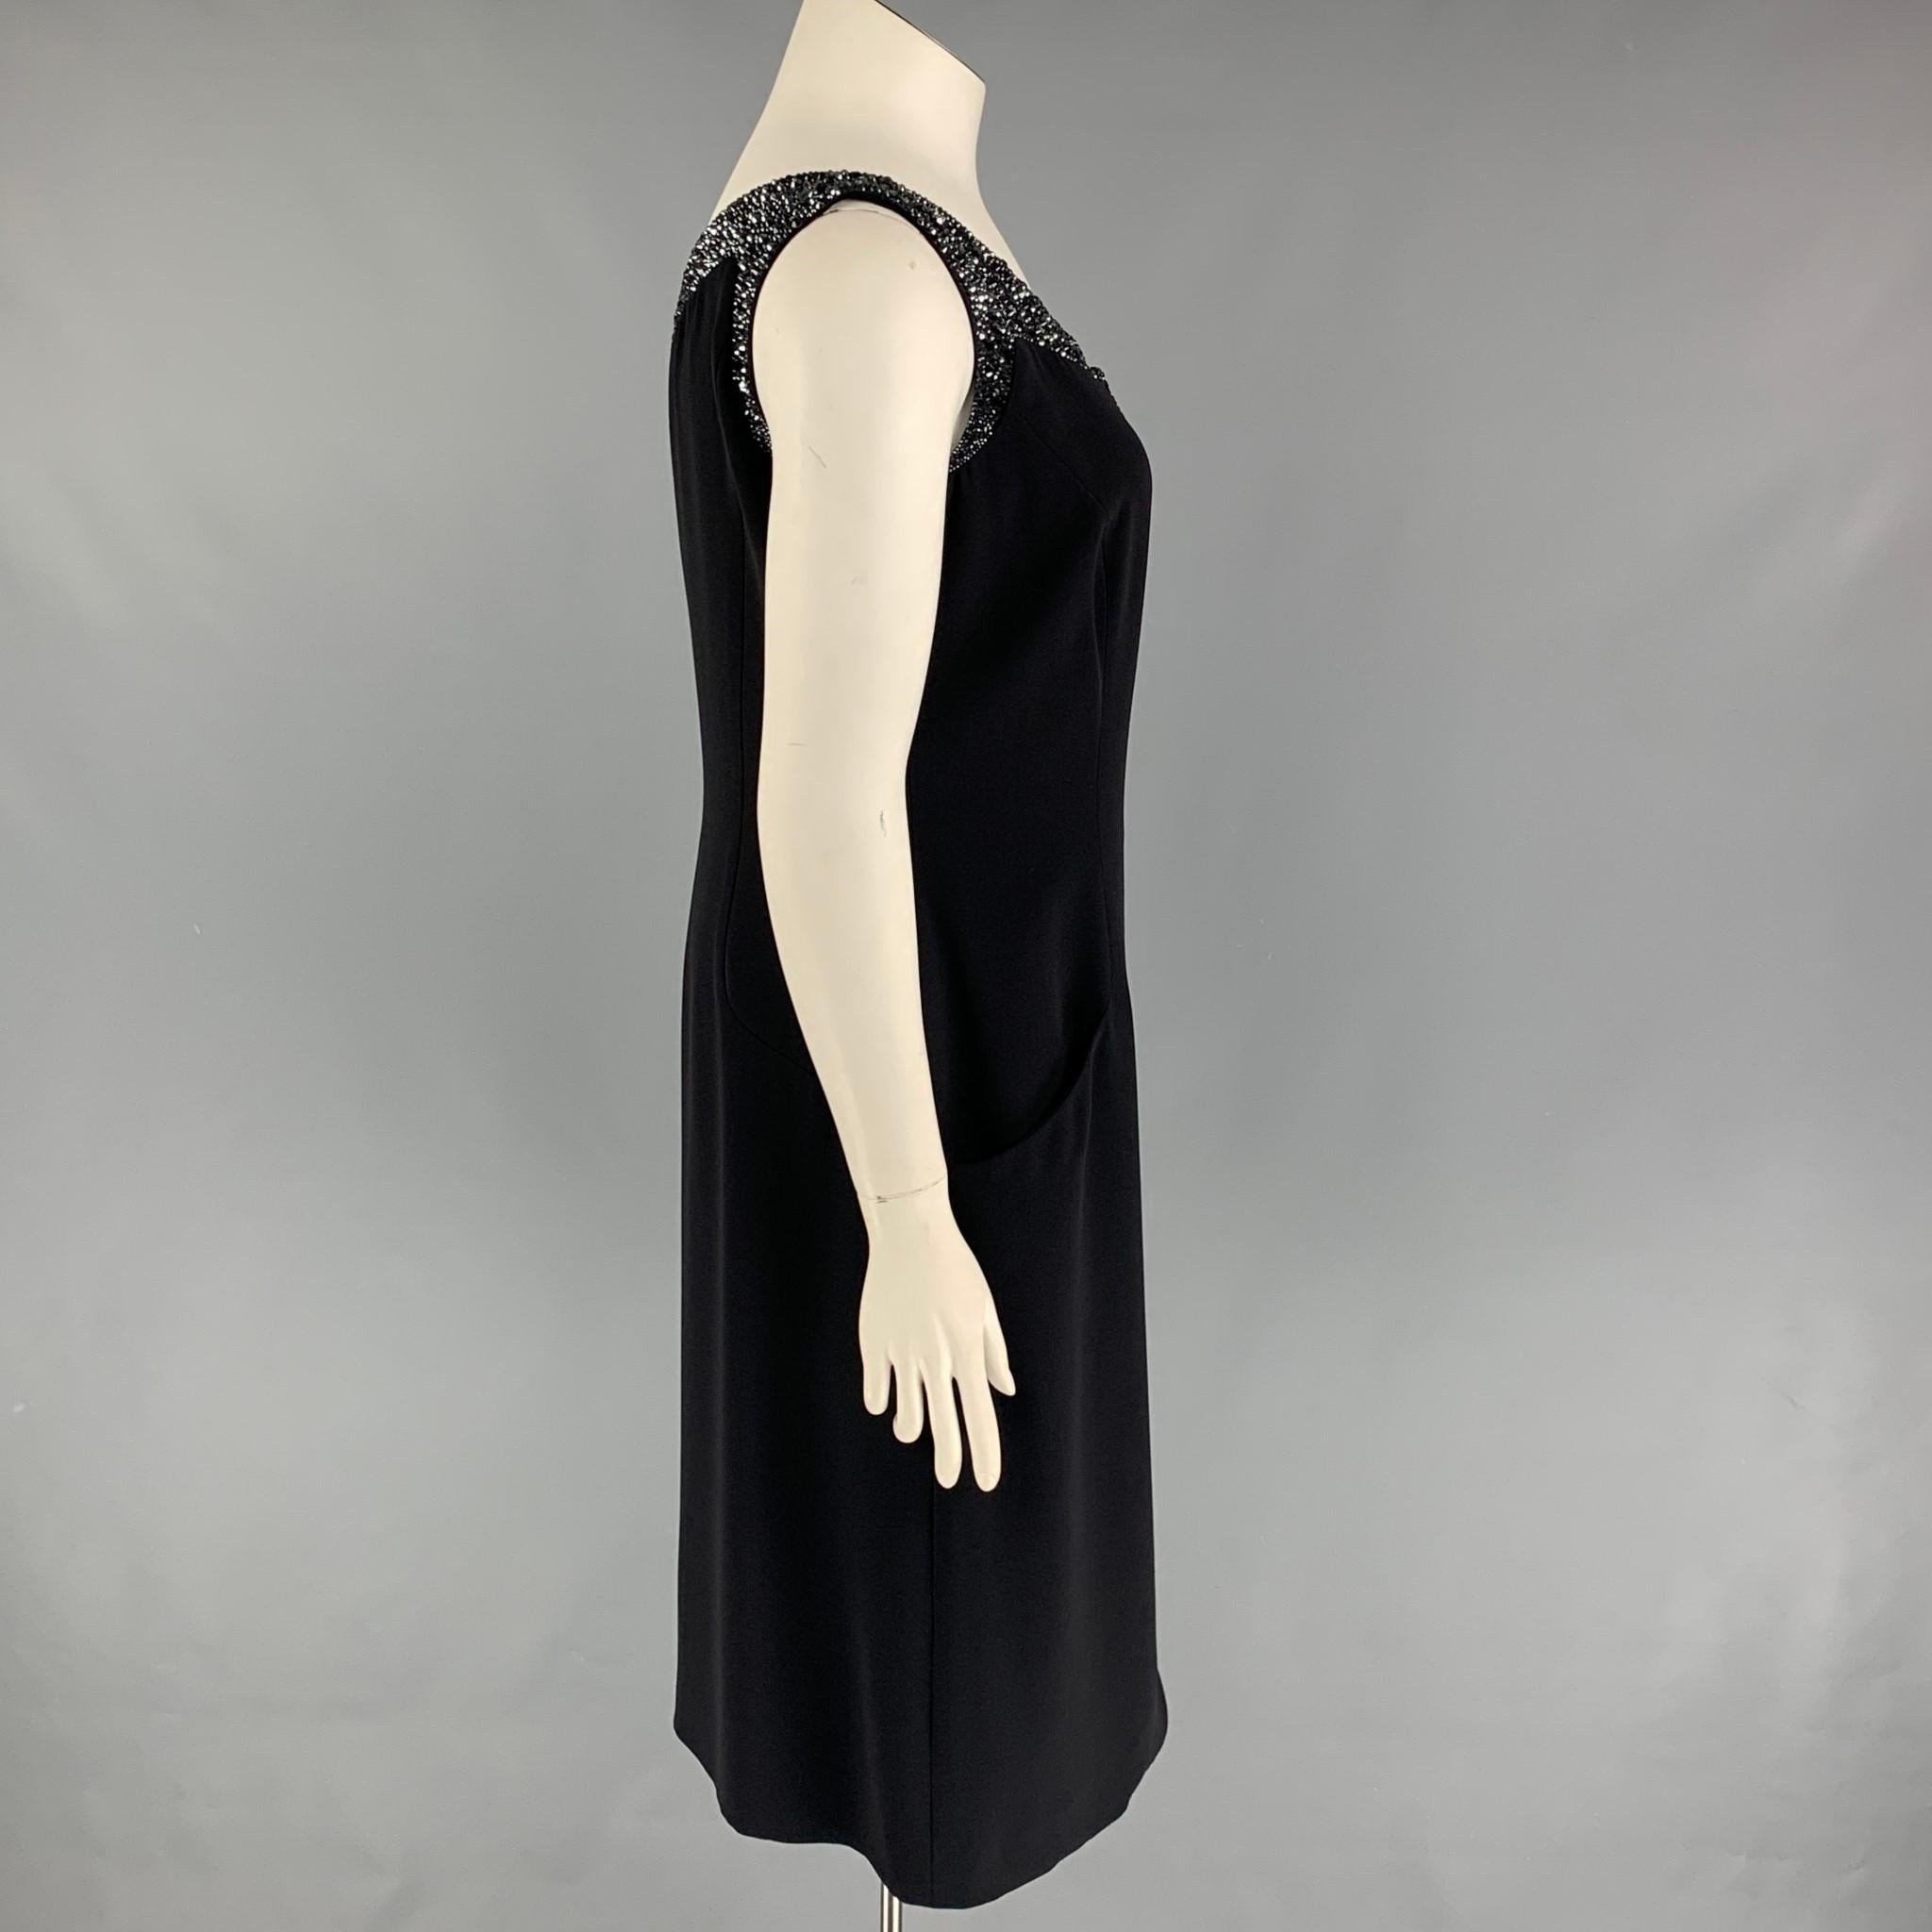 GIORGIO ARMANI dress comes in a black material featuring a rhinestone trim design, wrap style, slit pockets, and a side zipper closure. Made in Italy. 

Very Good Pre-Owned Condition.
Marked: 48

Measurements:

Bust: 37 in.
Waist: 34 in.
Hip: 38